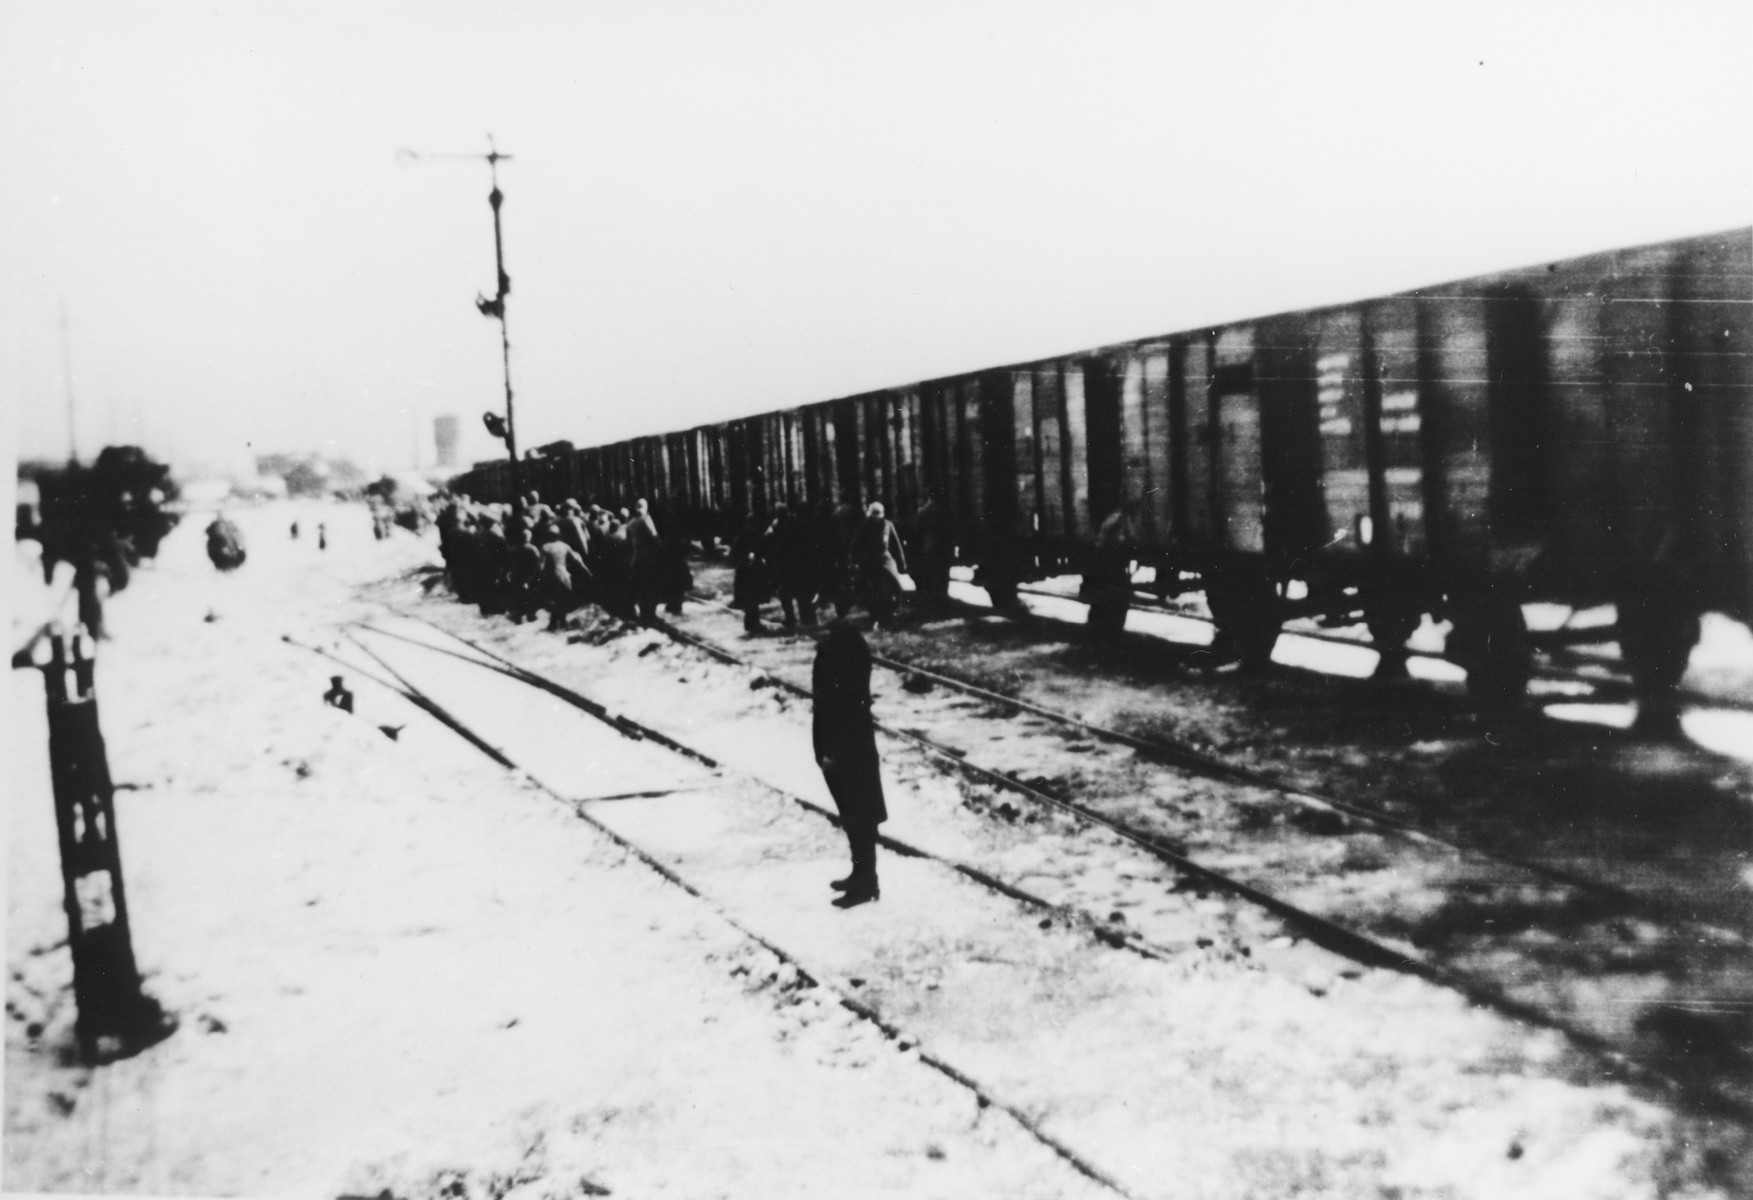 A German stands guards on a snow-covered railroad track as a group ...